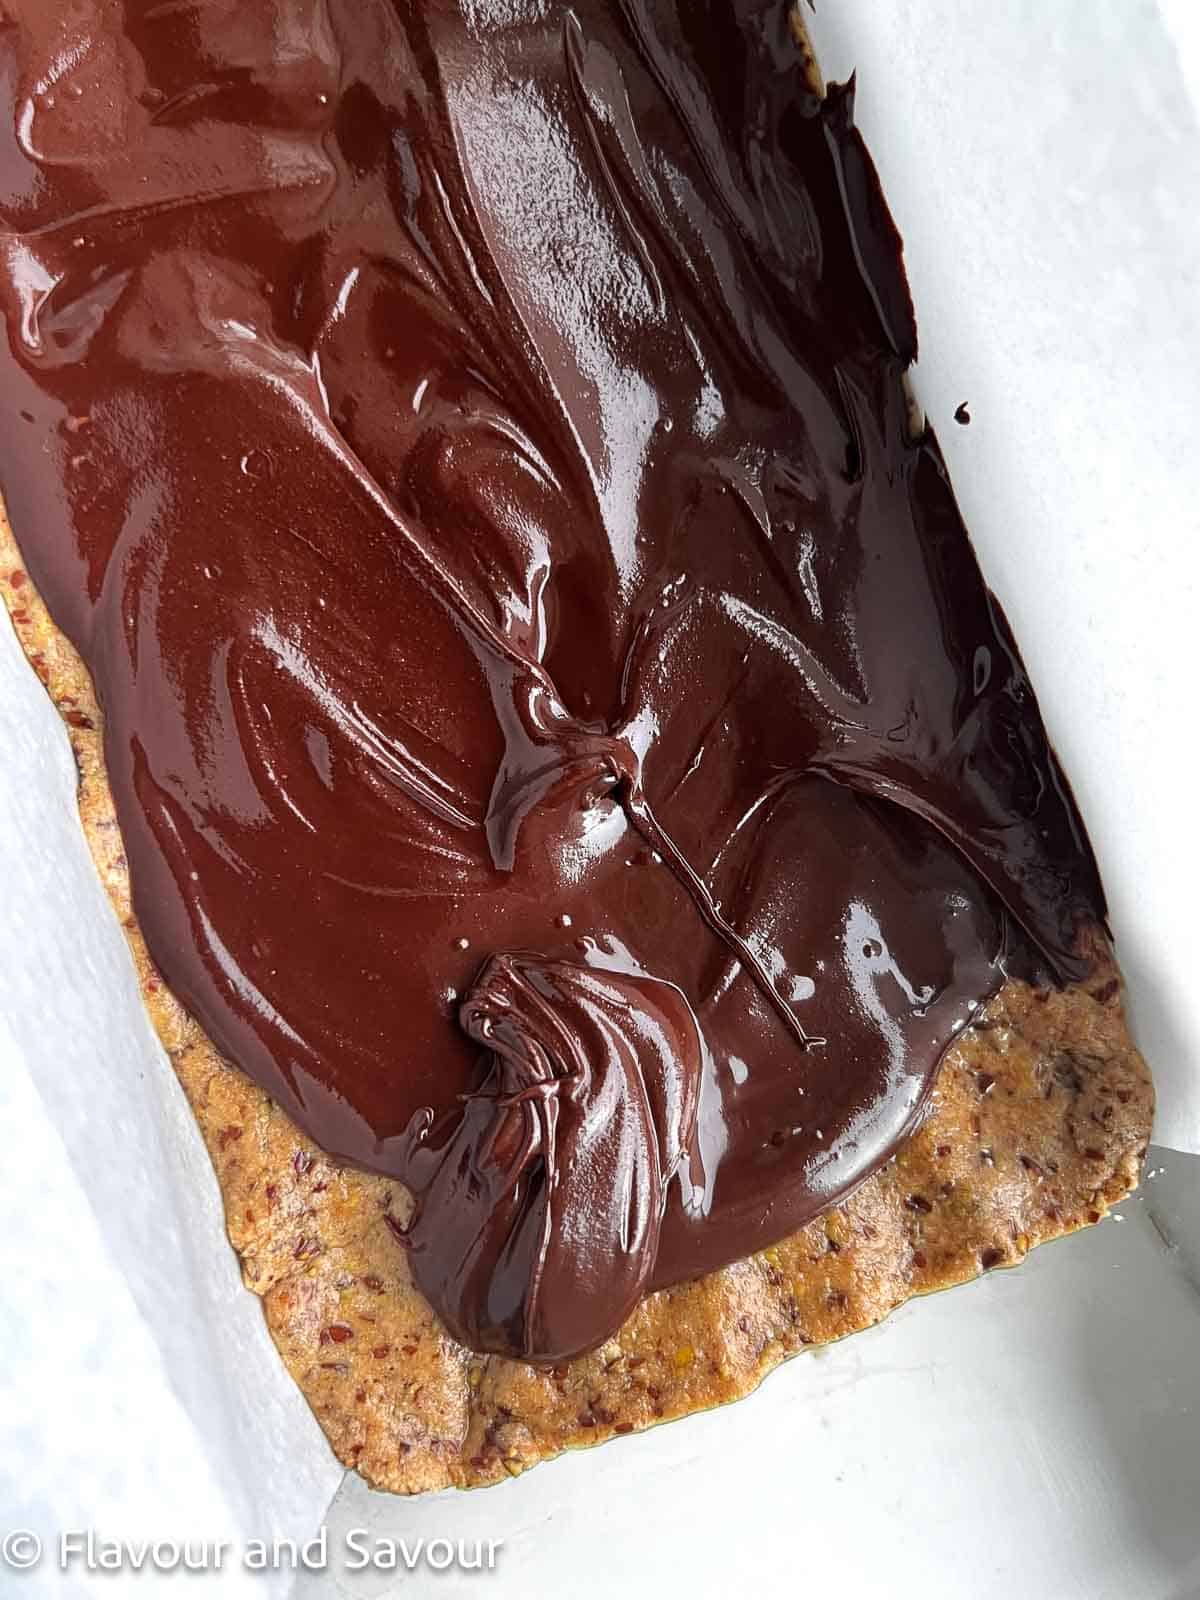 Melted chocolate layer on peanut butter collagen bars in a loaf pan.